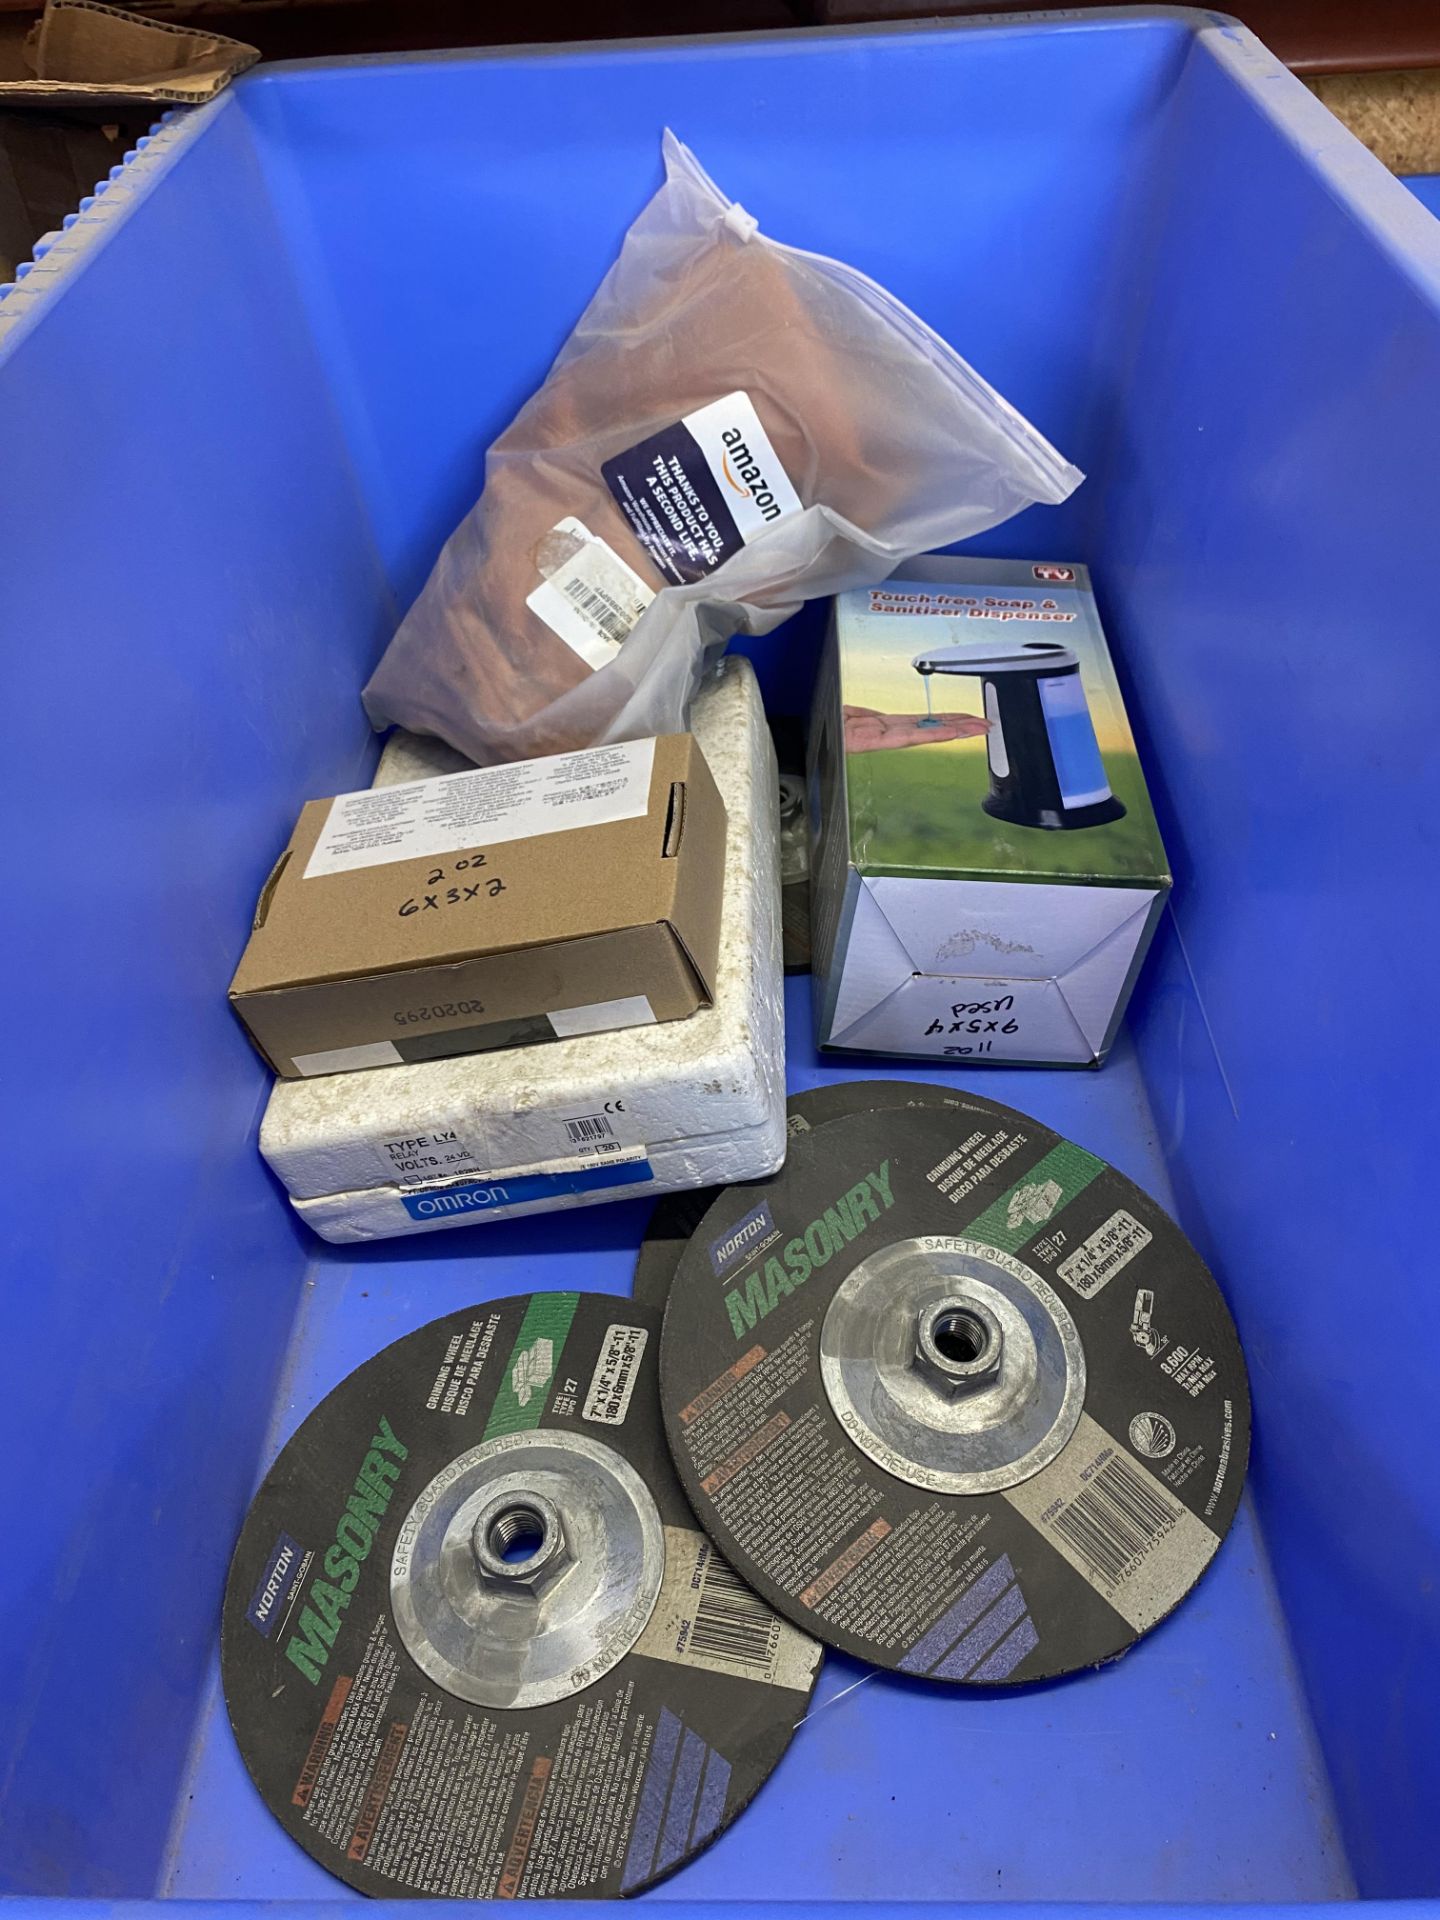 Contents of Bin, 24"x16"x12" - Includes Blue Bin - Image 2 of 2